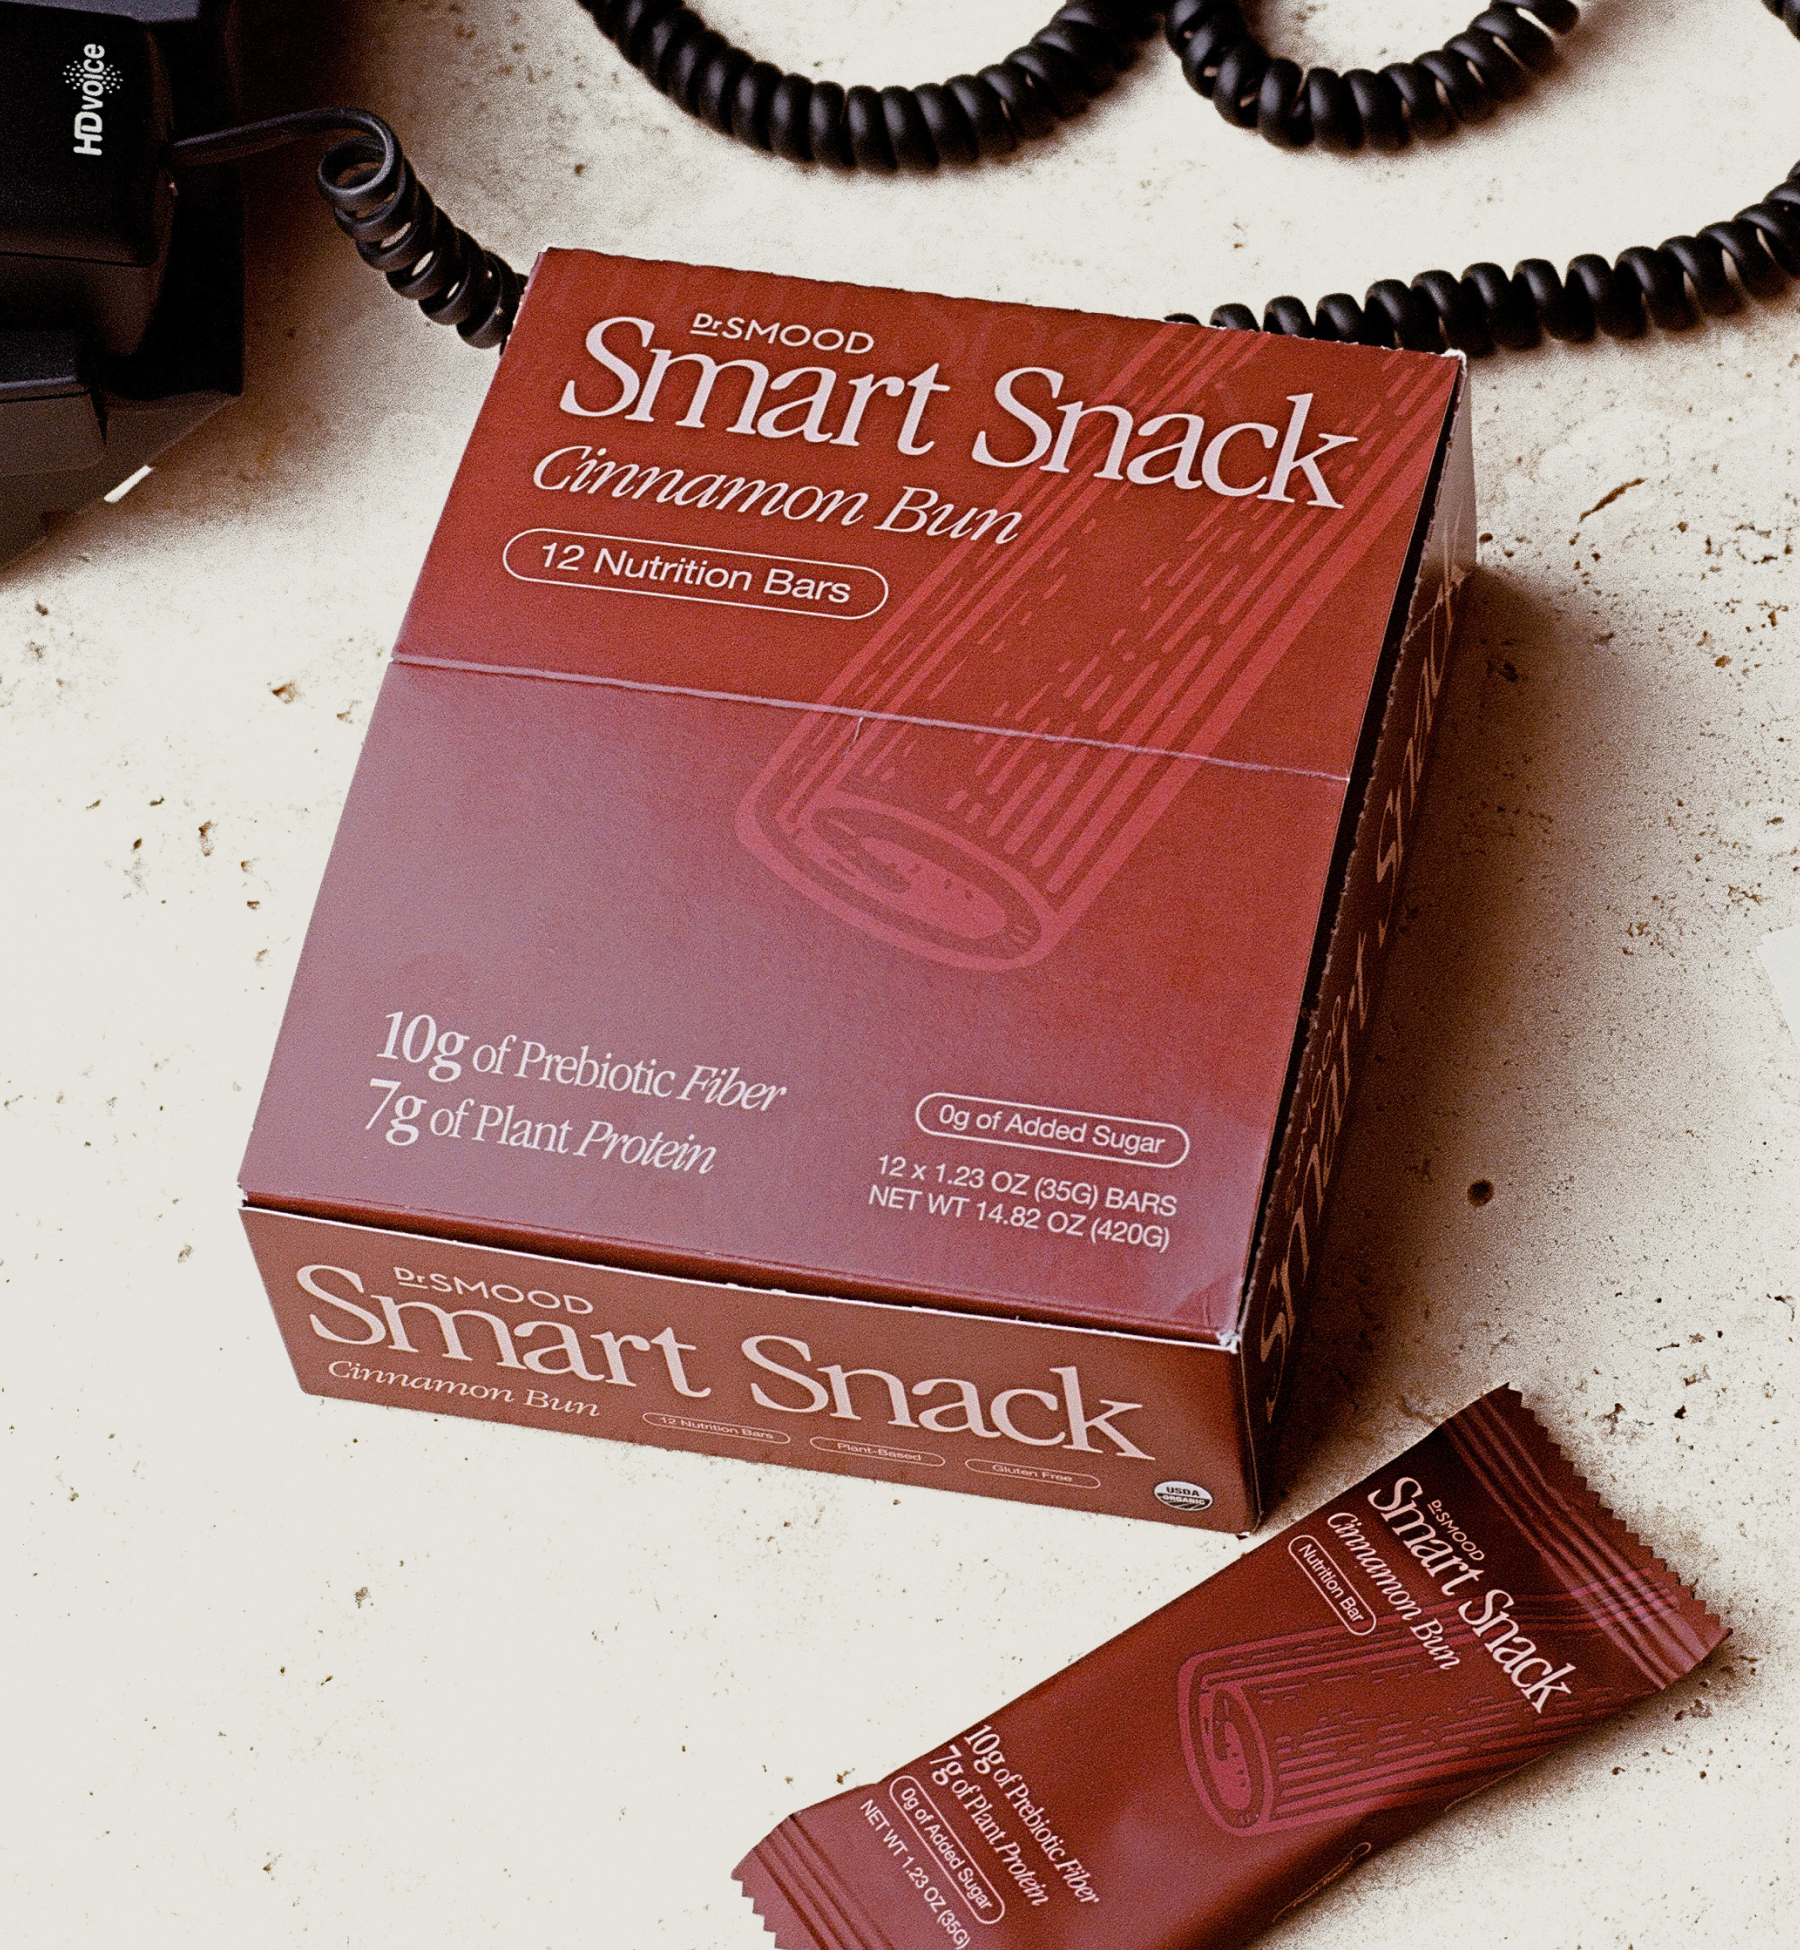 This image showcases the Dr. Smood Smart Snack Cinnamon Bun box of nutrition bars placed on a light-colored surface. The box is dark red and prominently features the product name and key nutritional benefits, including “10g of Prebiotic Fiber” and “7g of Plant Protein,” along with “0g of Added Sugar.” One of the individual bars is also visible in front of the box, highlighting its minimalist design and the cinnamon stick illustration. A telephone cord is seen in the background.